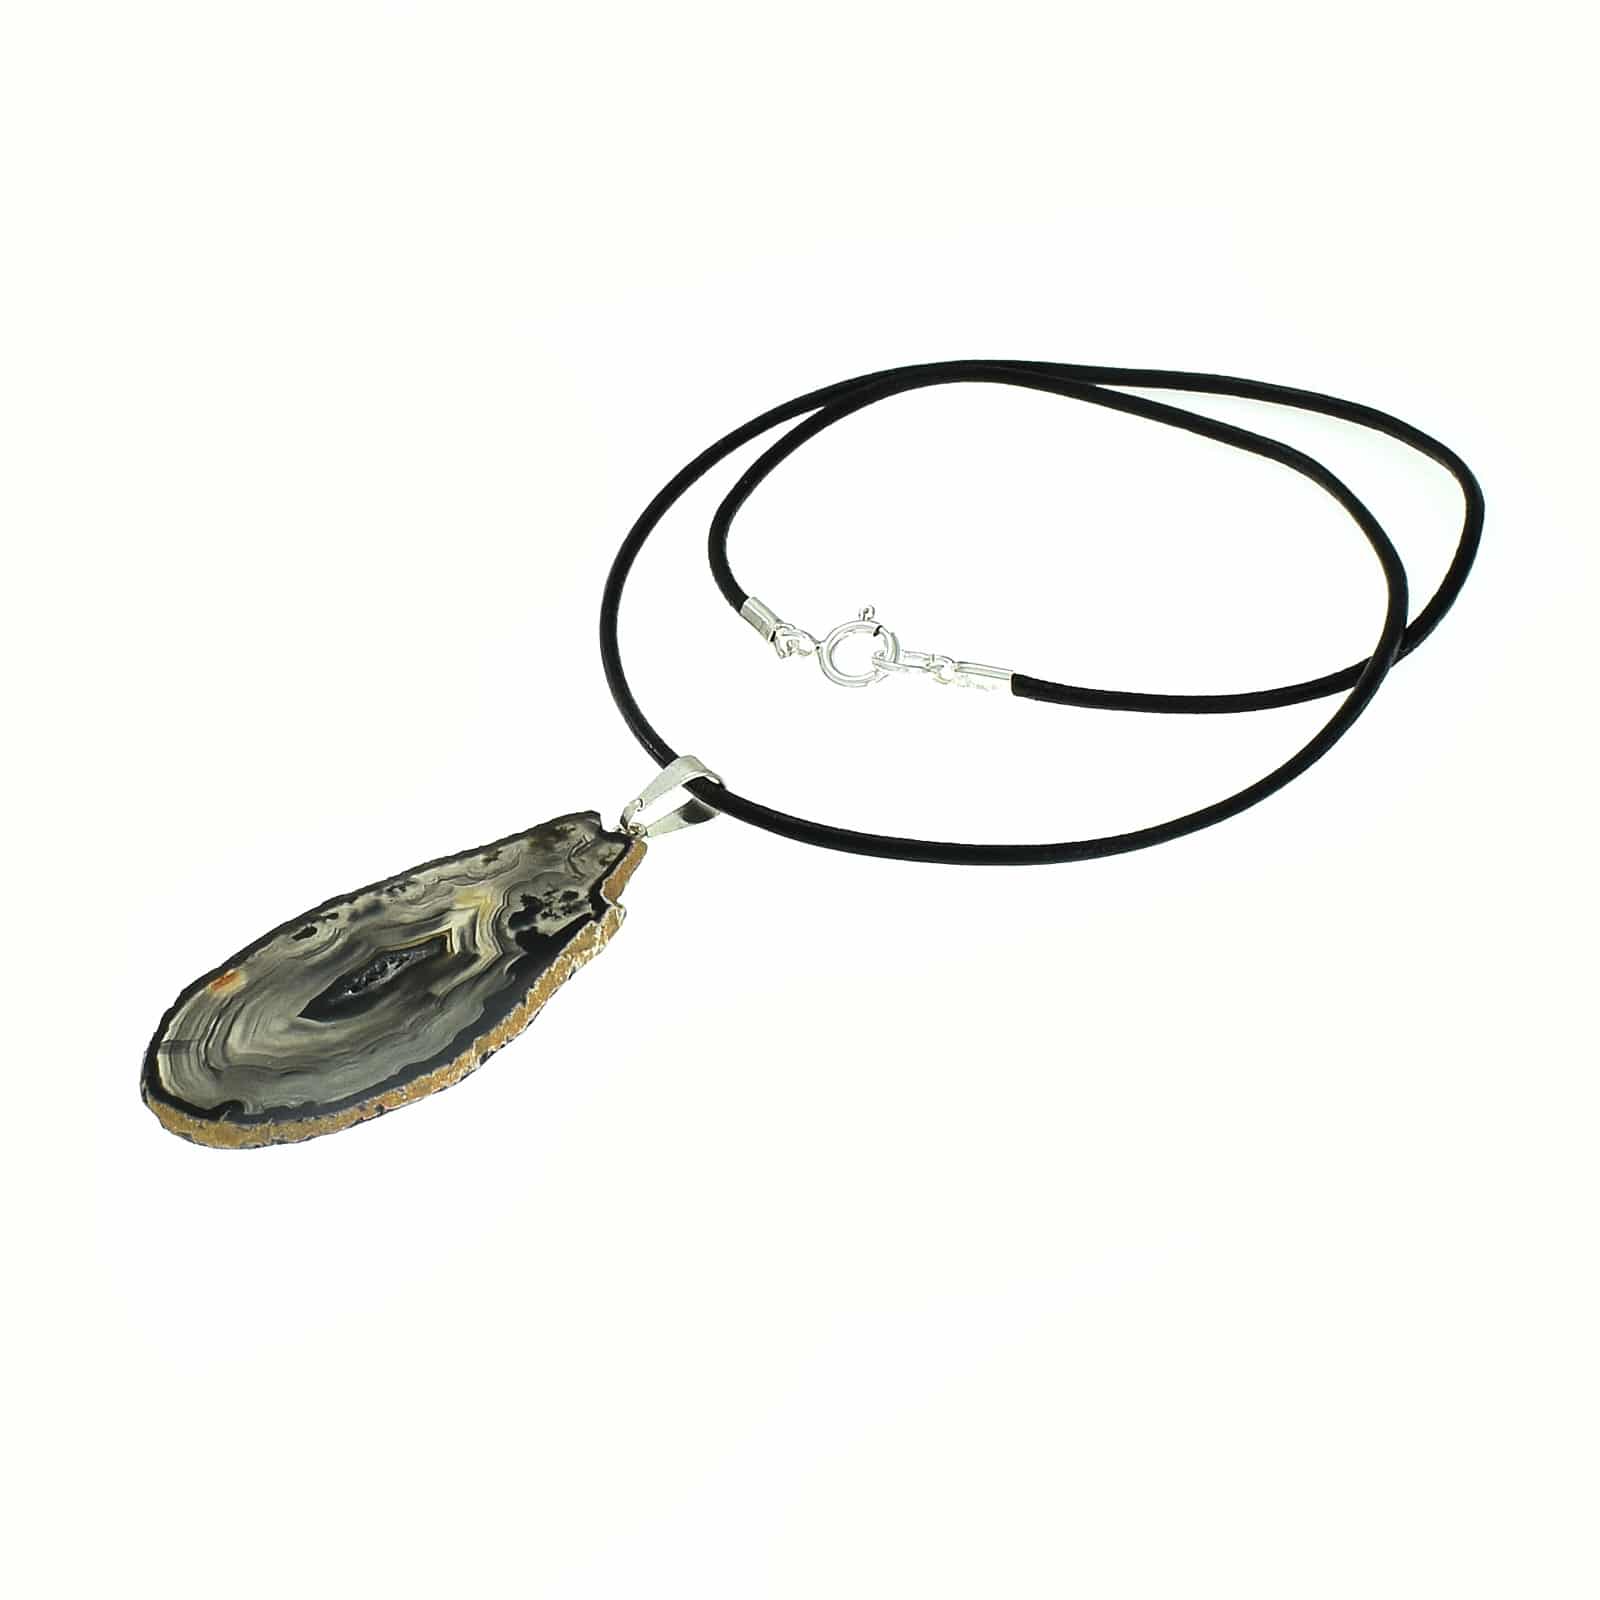 Black Agate pendant with silver plated hypoallergenic metal. The Agate is polished on both sides and threaded on a black leather with clasp made of sterling silver. Buy online shop.